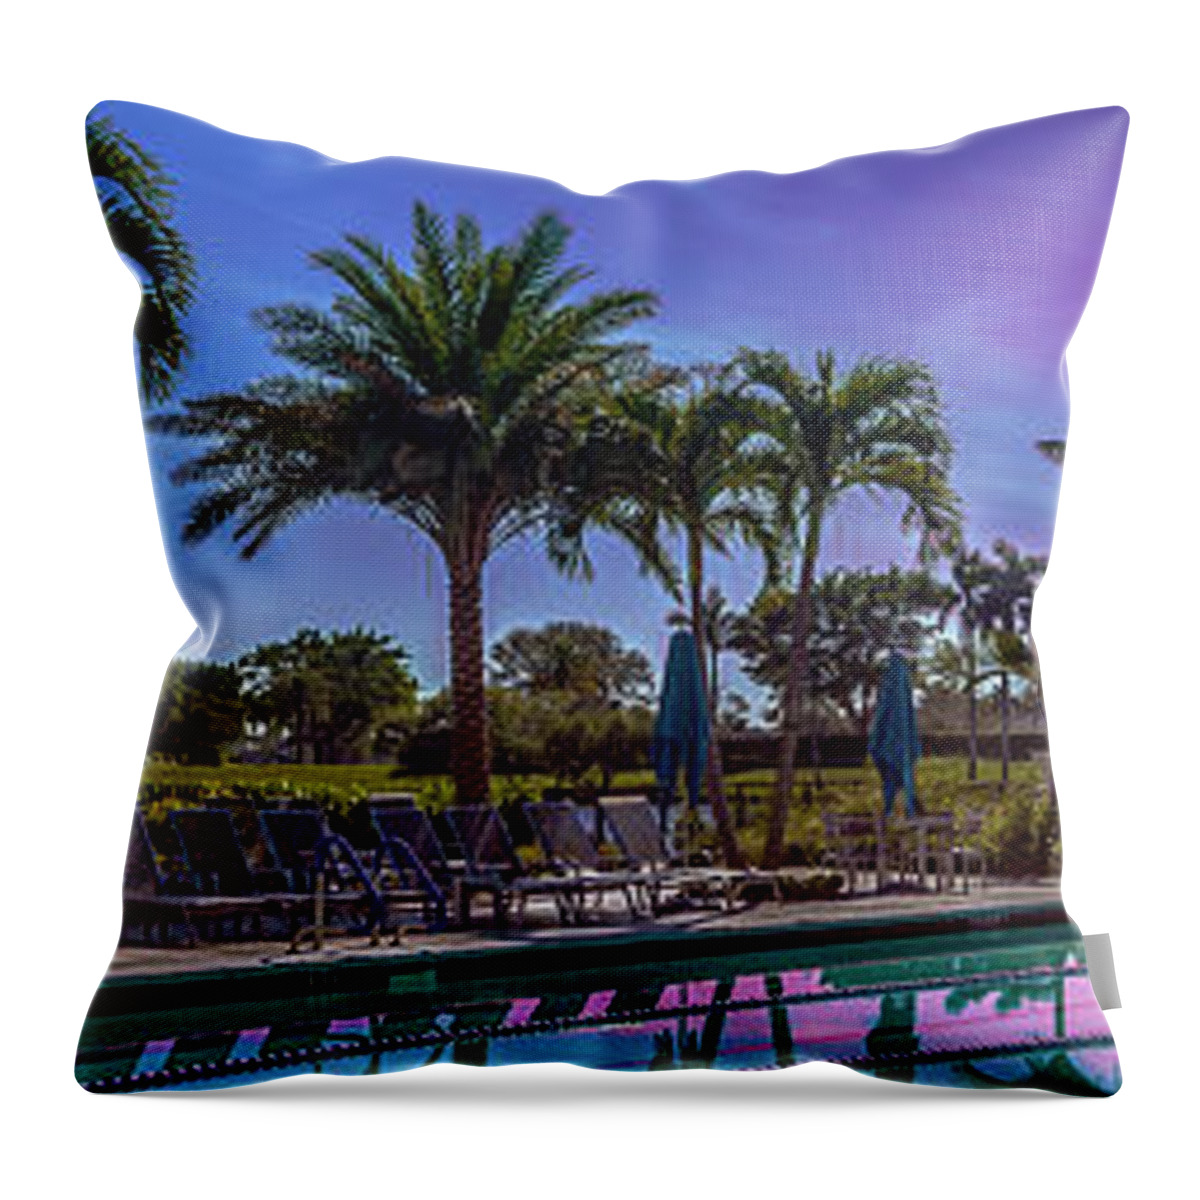 Pool Twilight Throw Pillow featuring the photograph Twilight Pool by Jody Lane